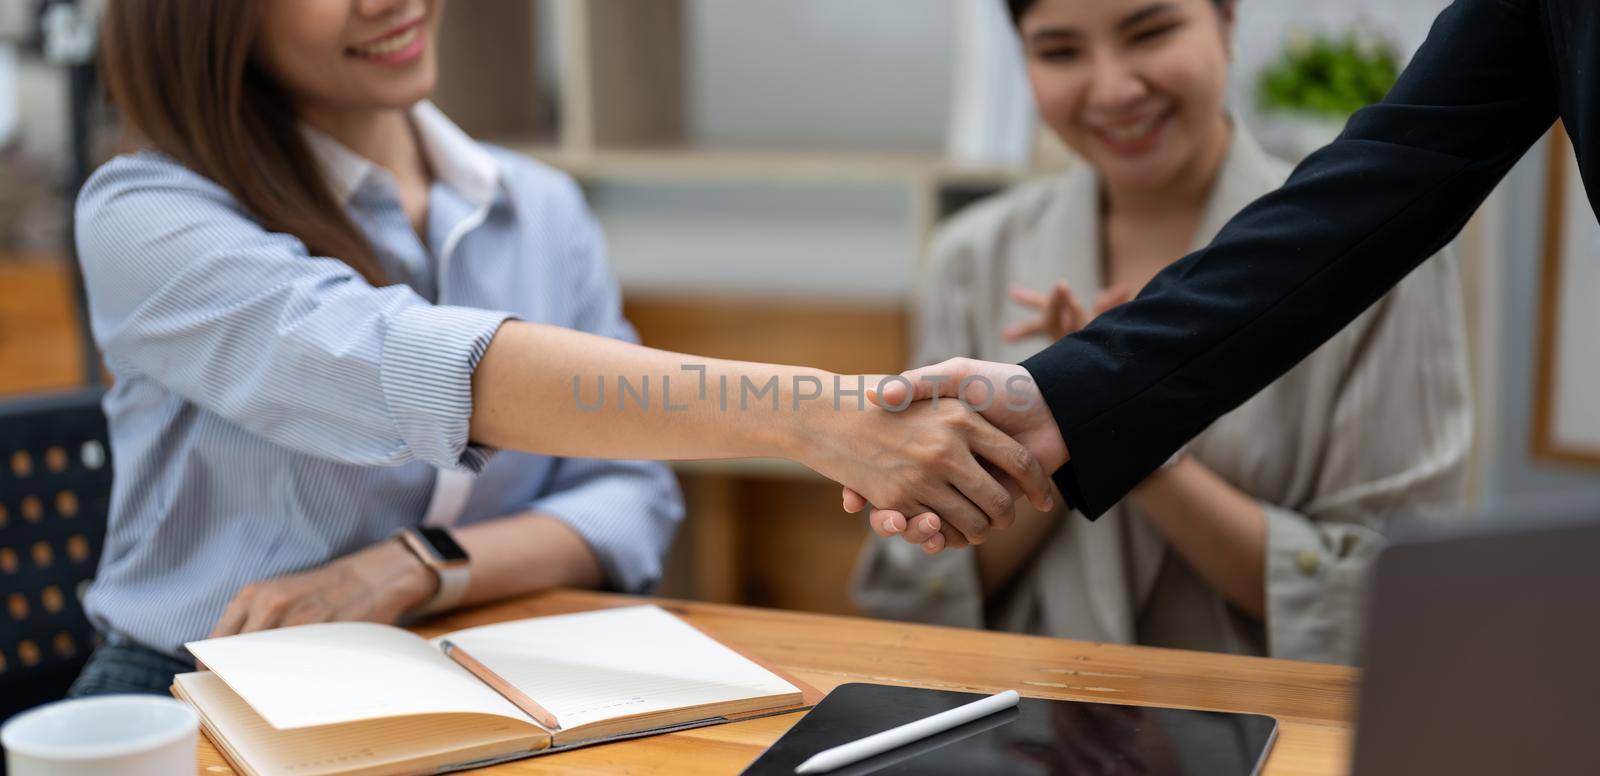 businesswomen Handshaking,happy with work,the woman she is enjoying with her workmate,Handshake Gesturing People Connection Deal Concept by nateemee